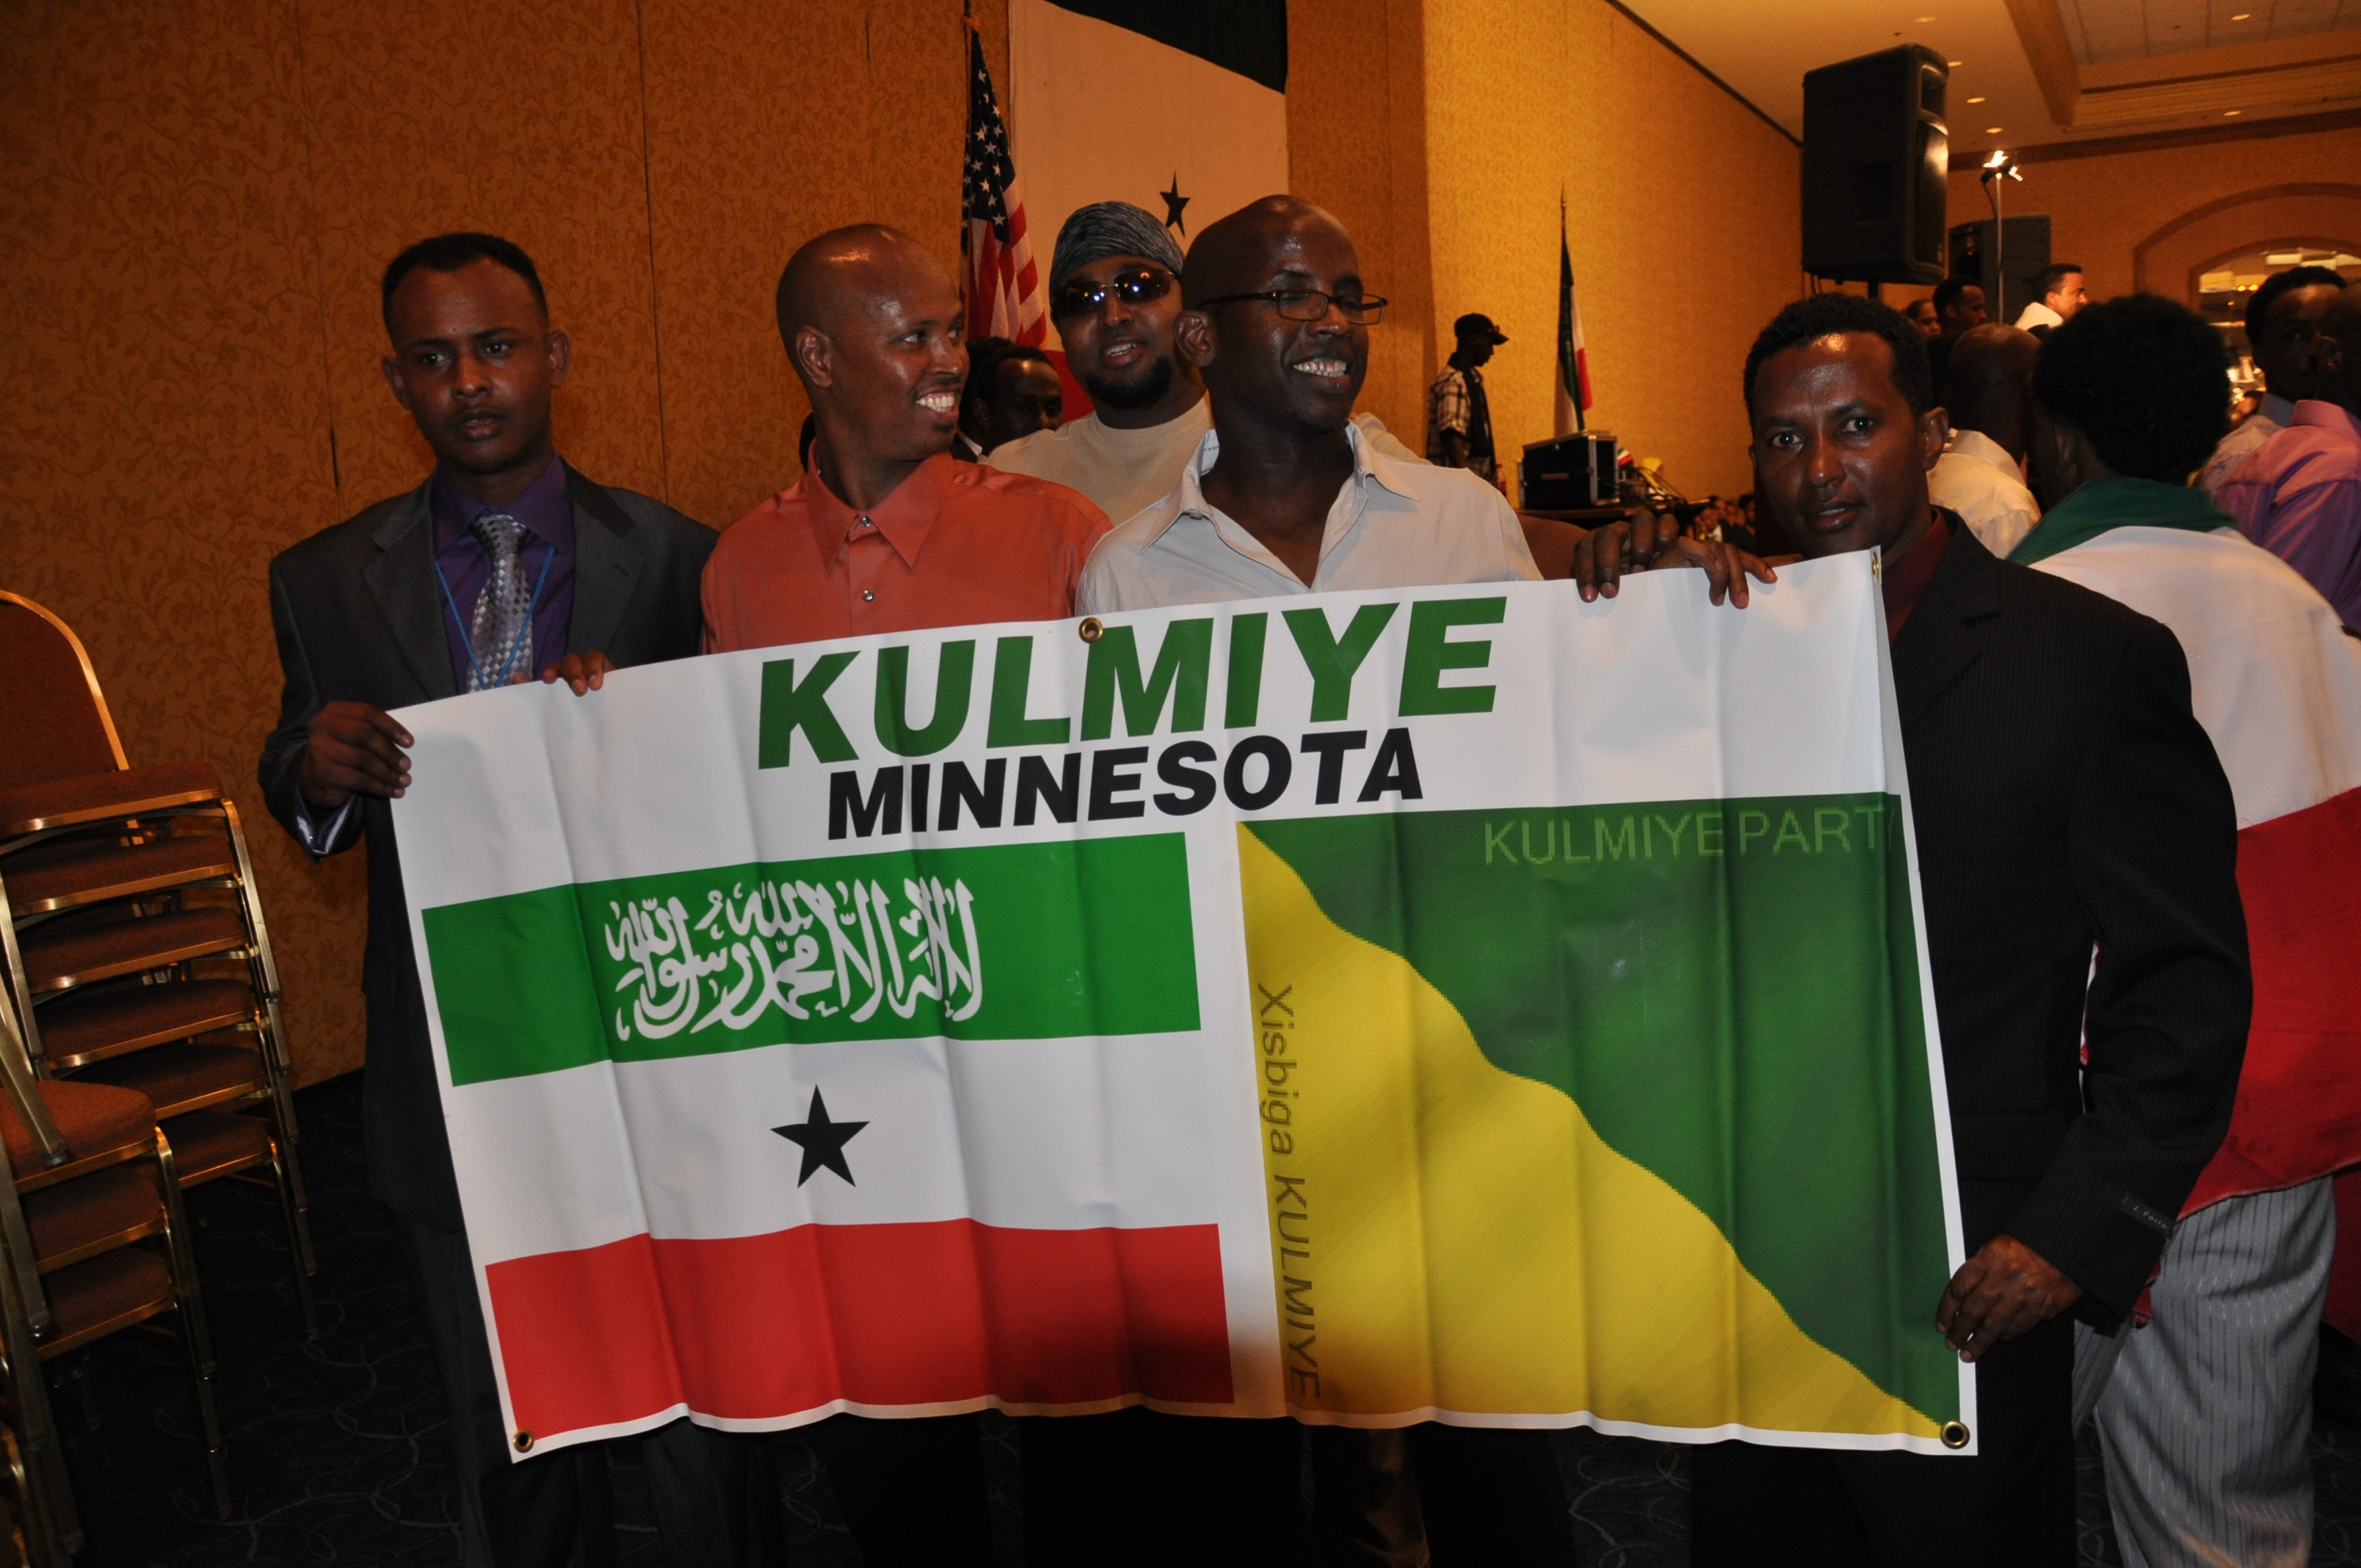 Five men standing, holding a large kulmiye party flag with the somaliland national flag colors and text, in a room with american flags in the background.